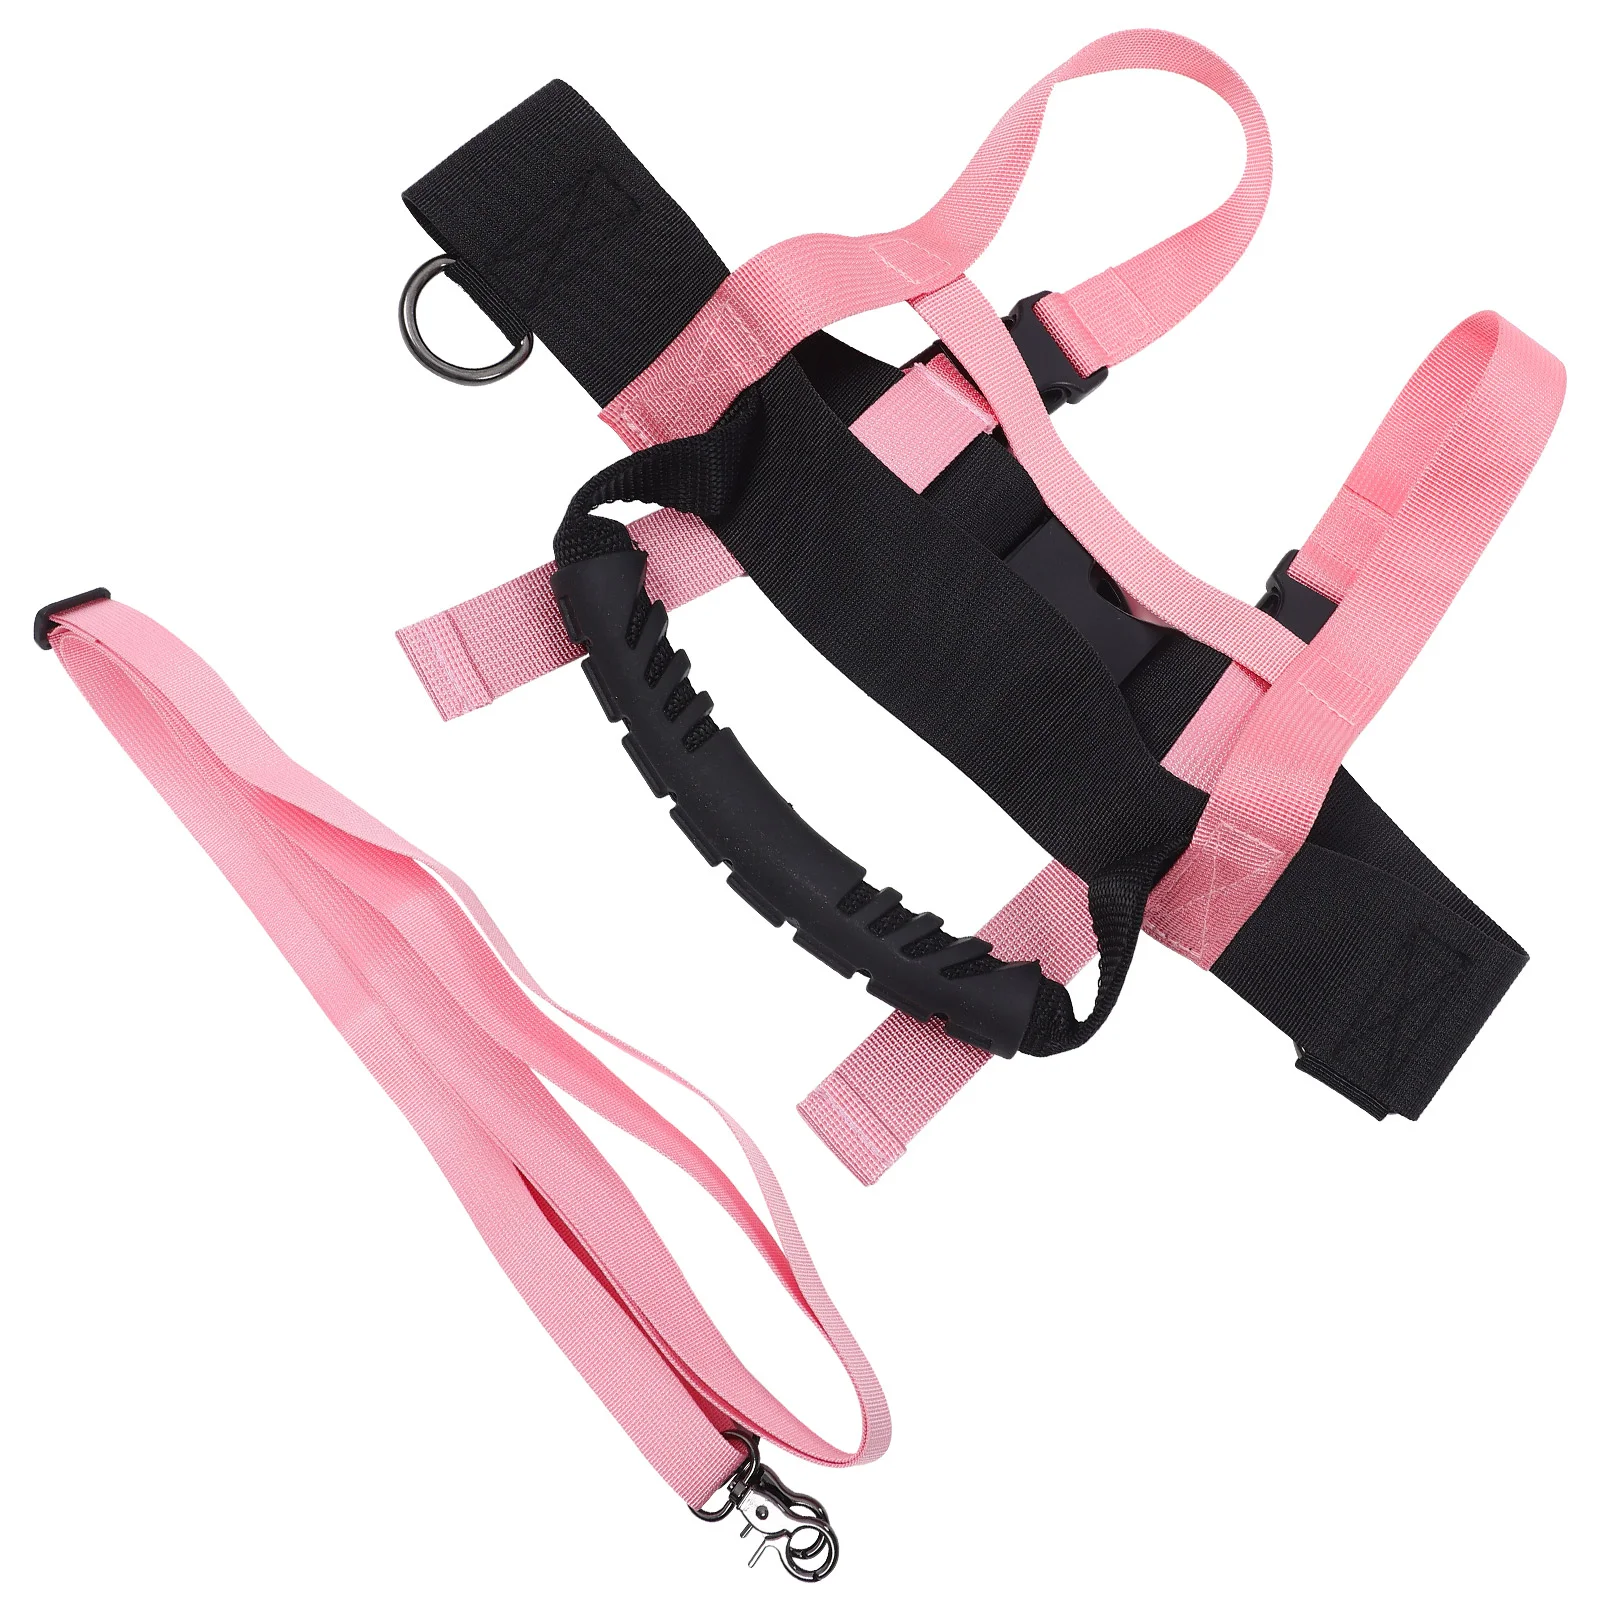 

Safety Kids Ski Harness Anti-falling Ski Learning Traction Harness Wear-resistant Skiing Shoulder Strap